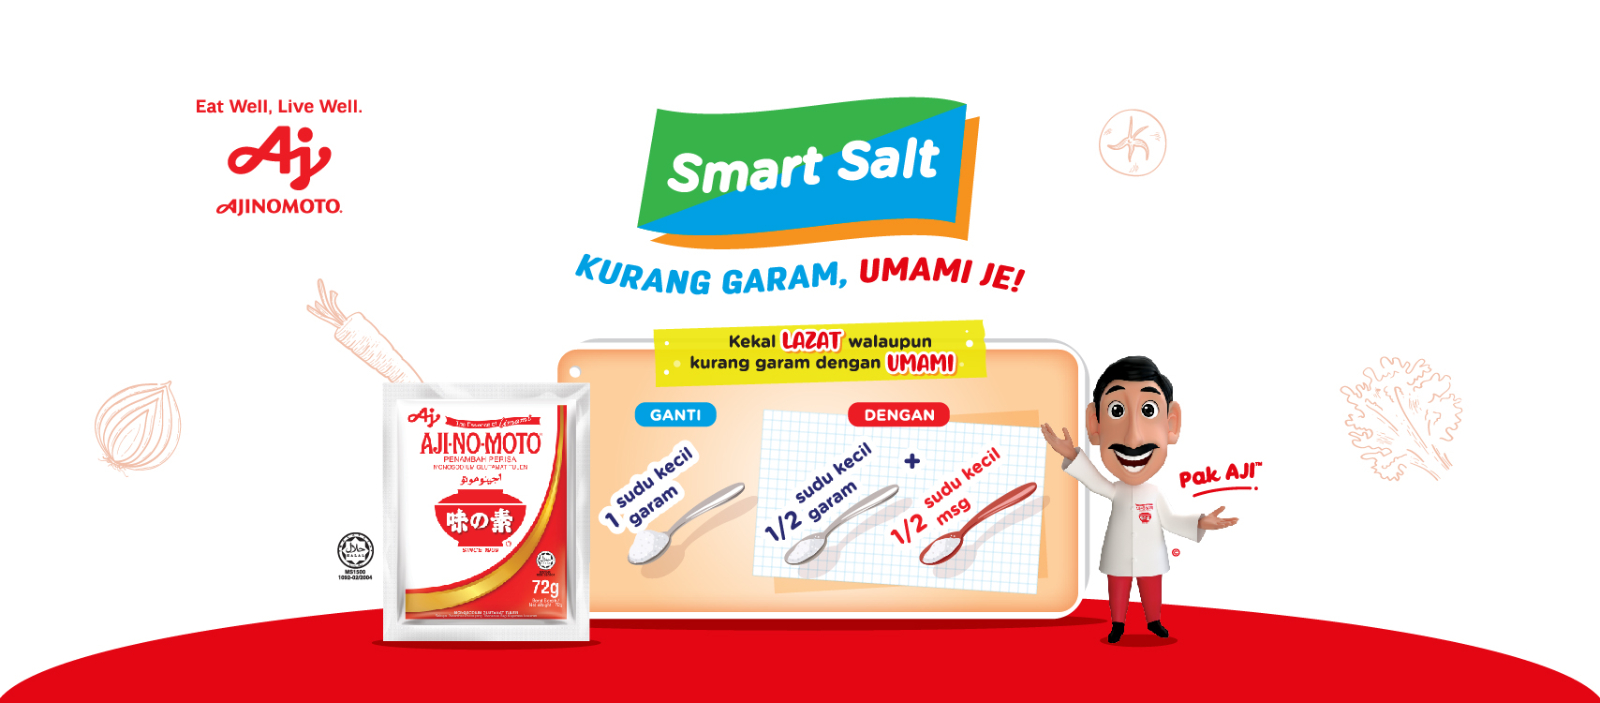 Ajinomoto Malaysia has Launched a Healthy Eating Campaign with the Introduction of the New "Smart Salt" Logo